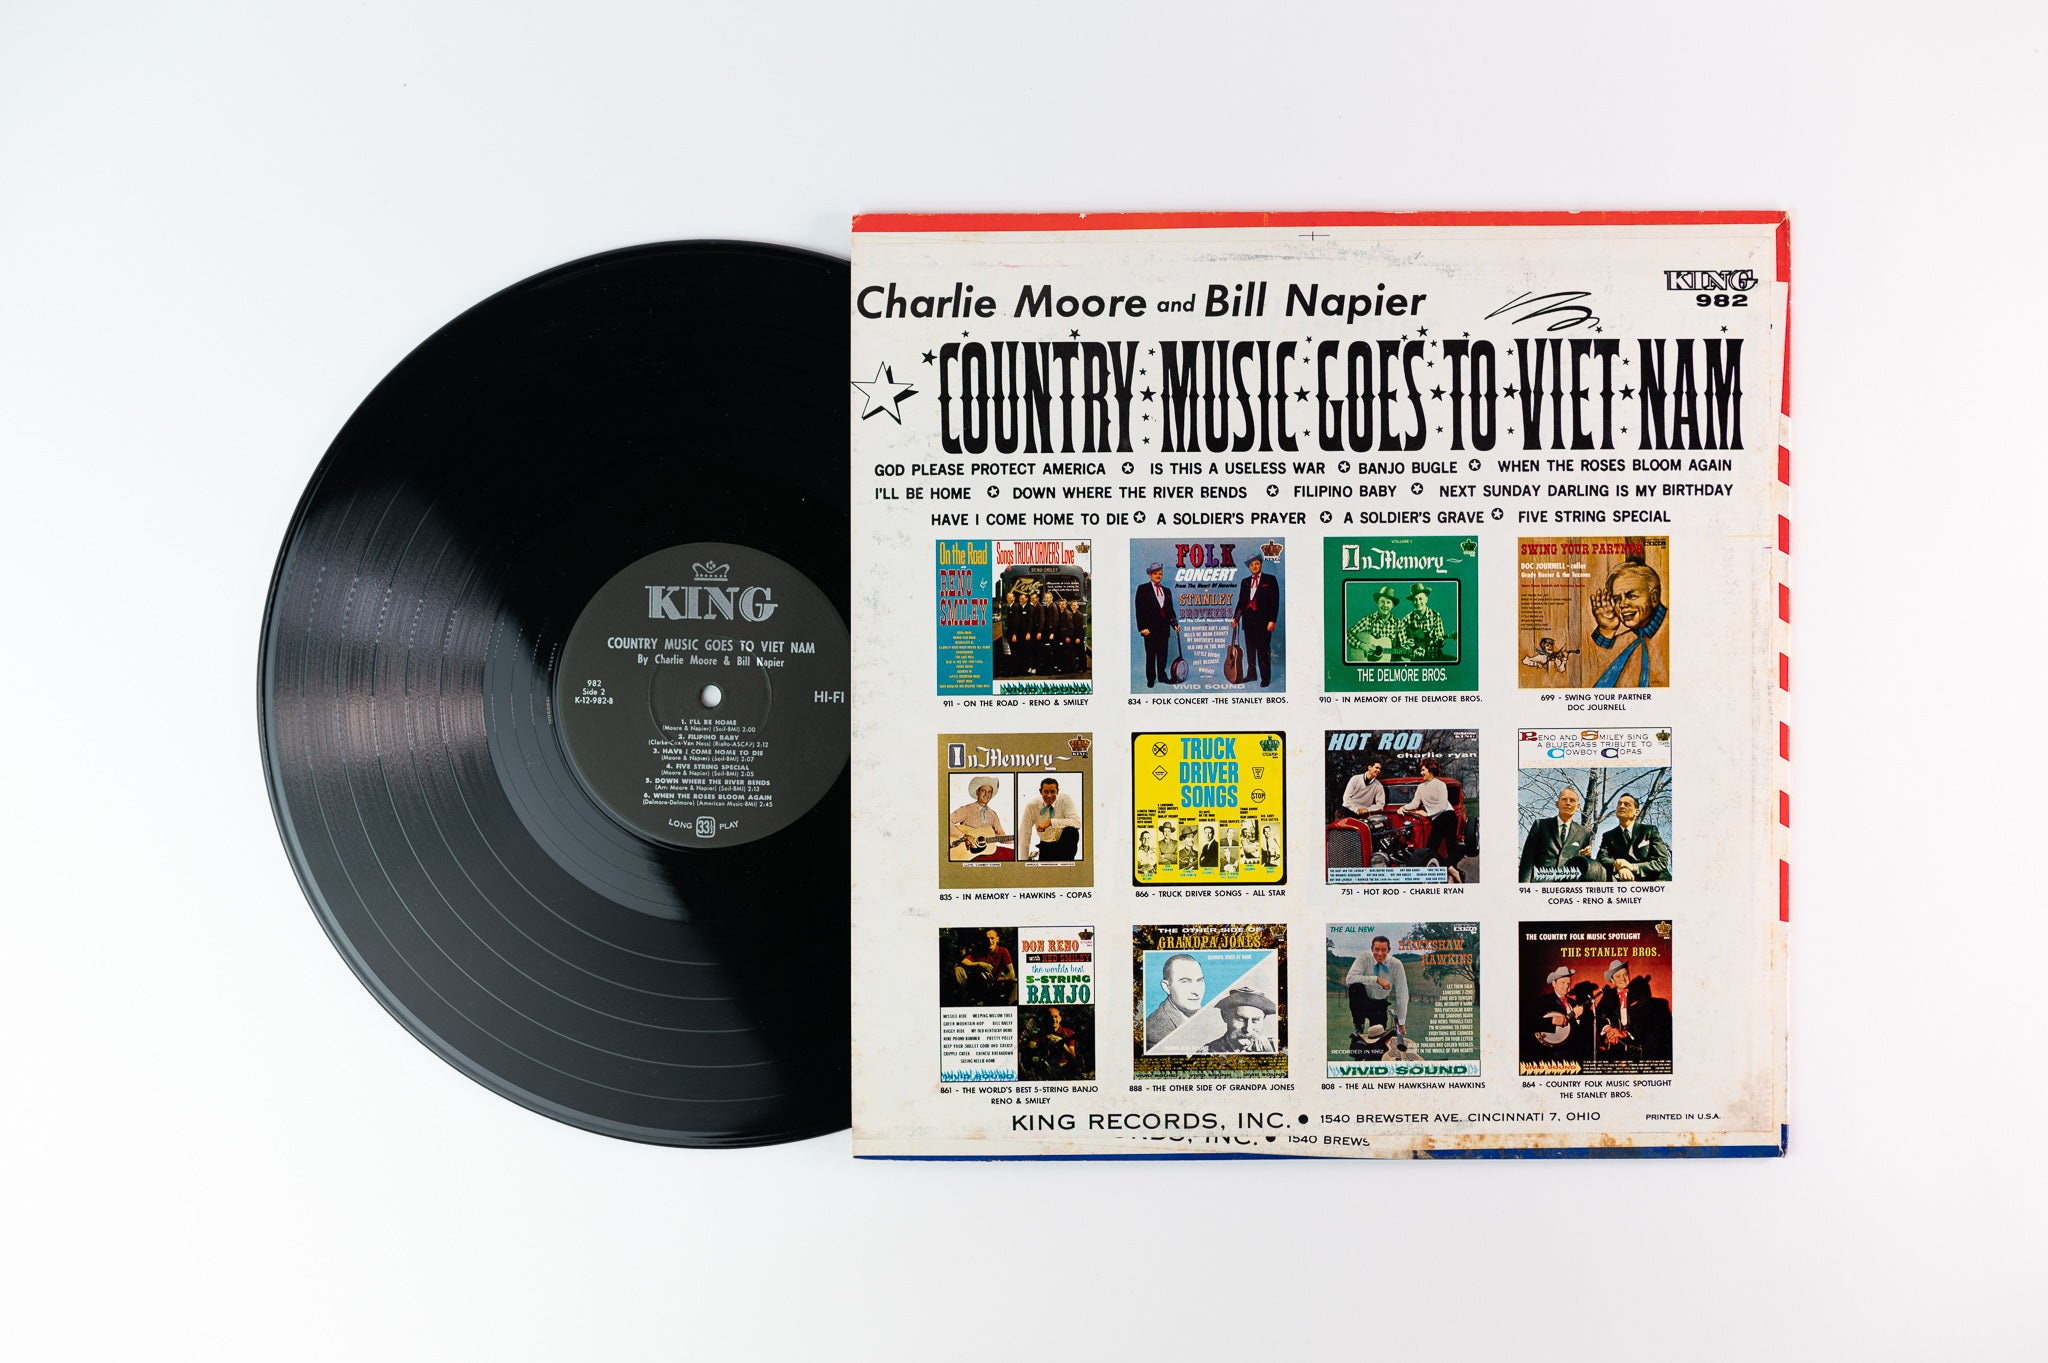 Moore & Napier - Country Music Goes To Viet Nam on King